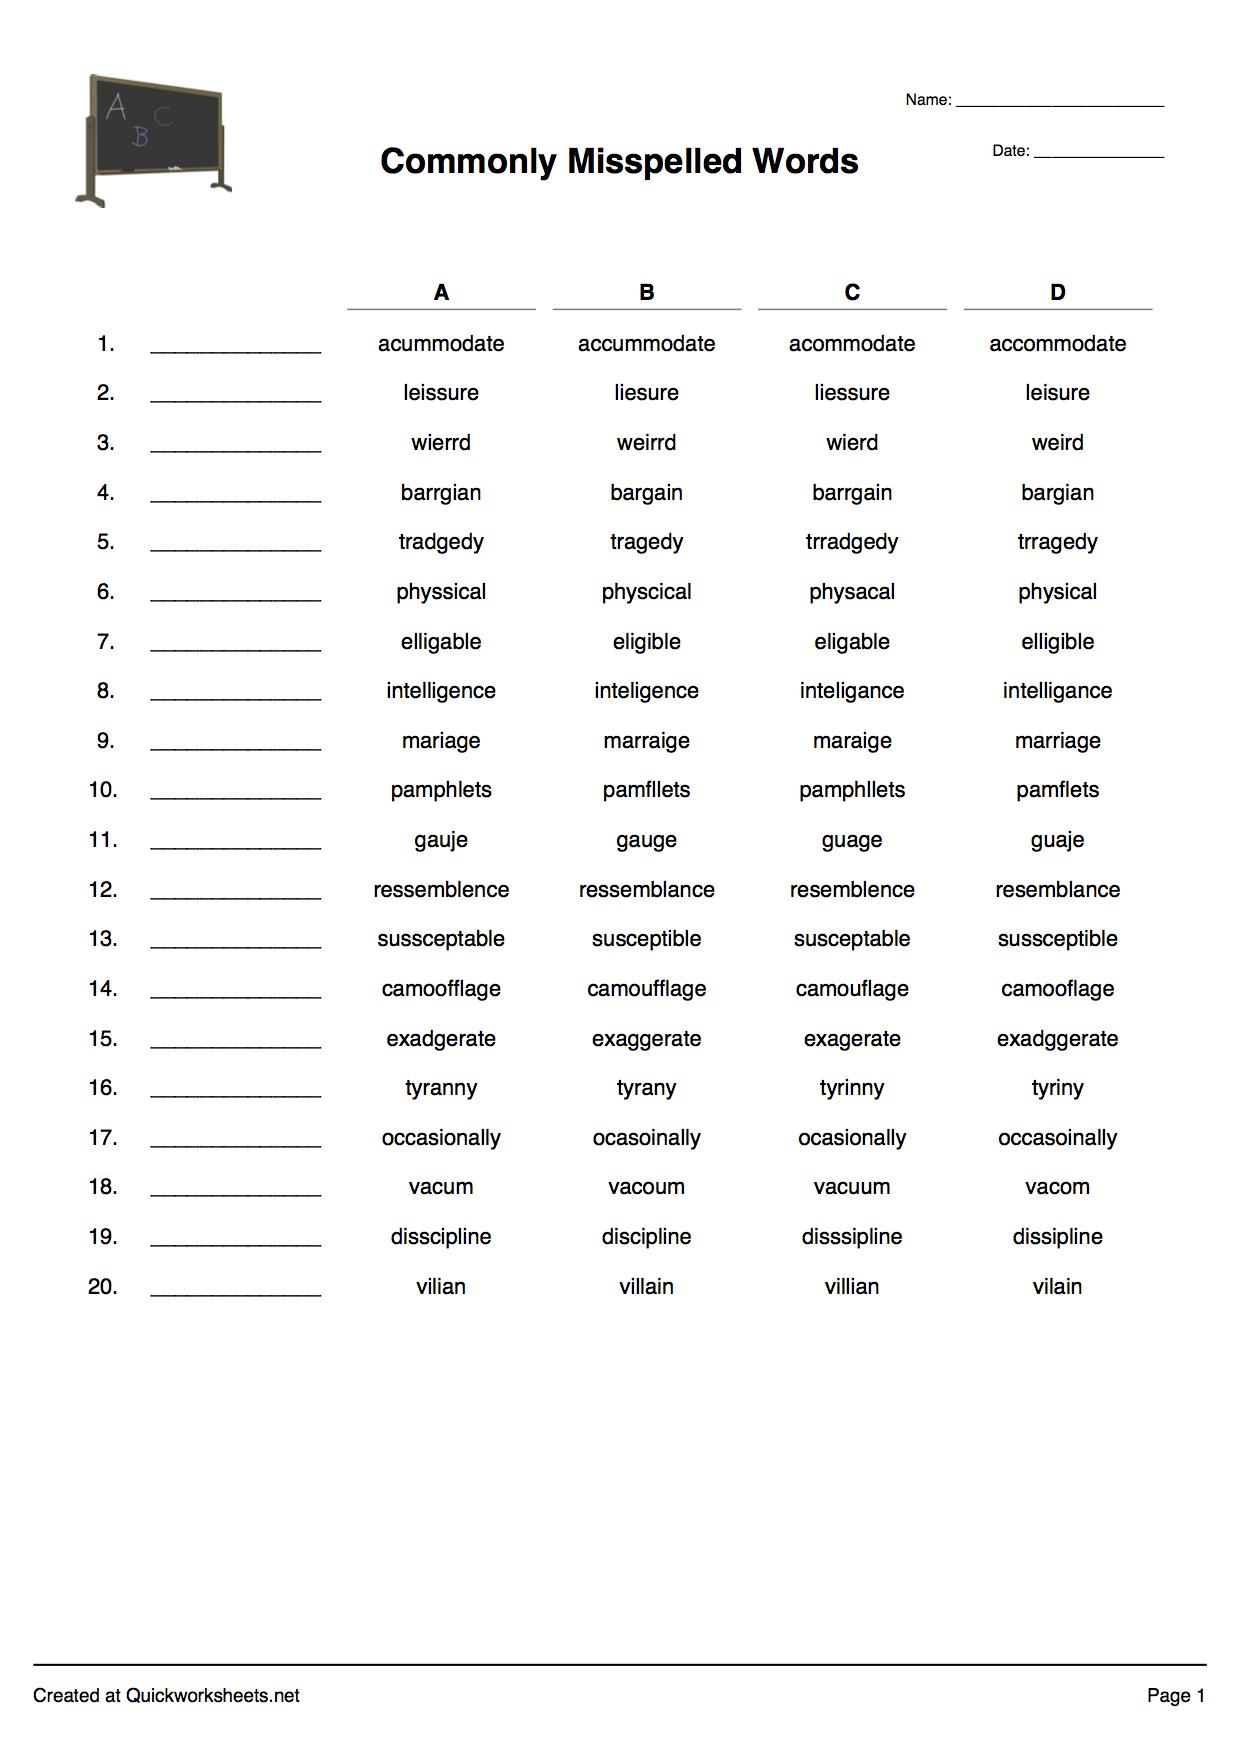 Word Scramble, Wordsearch, Crossword, Matching Pairs And Other - Free Printable Test Maker For Teachers